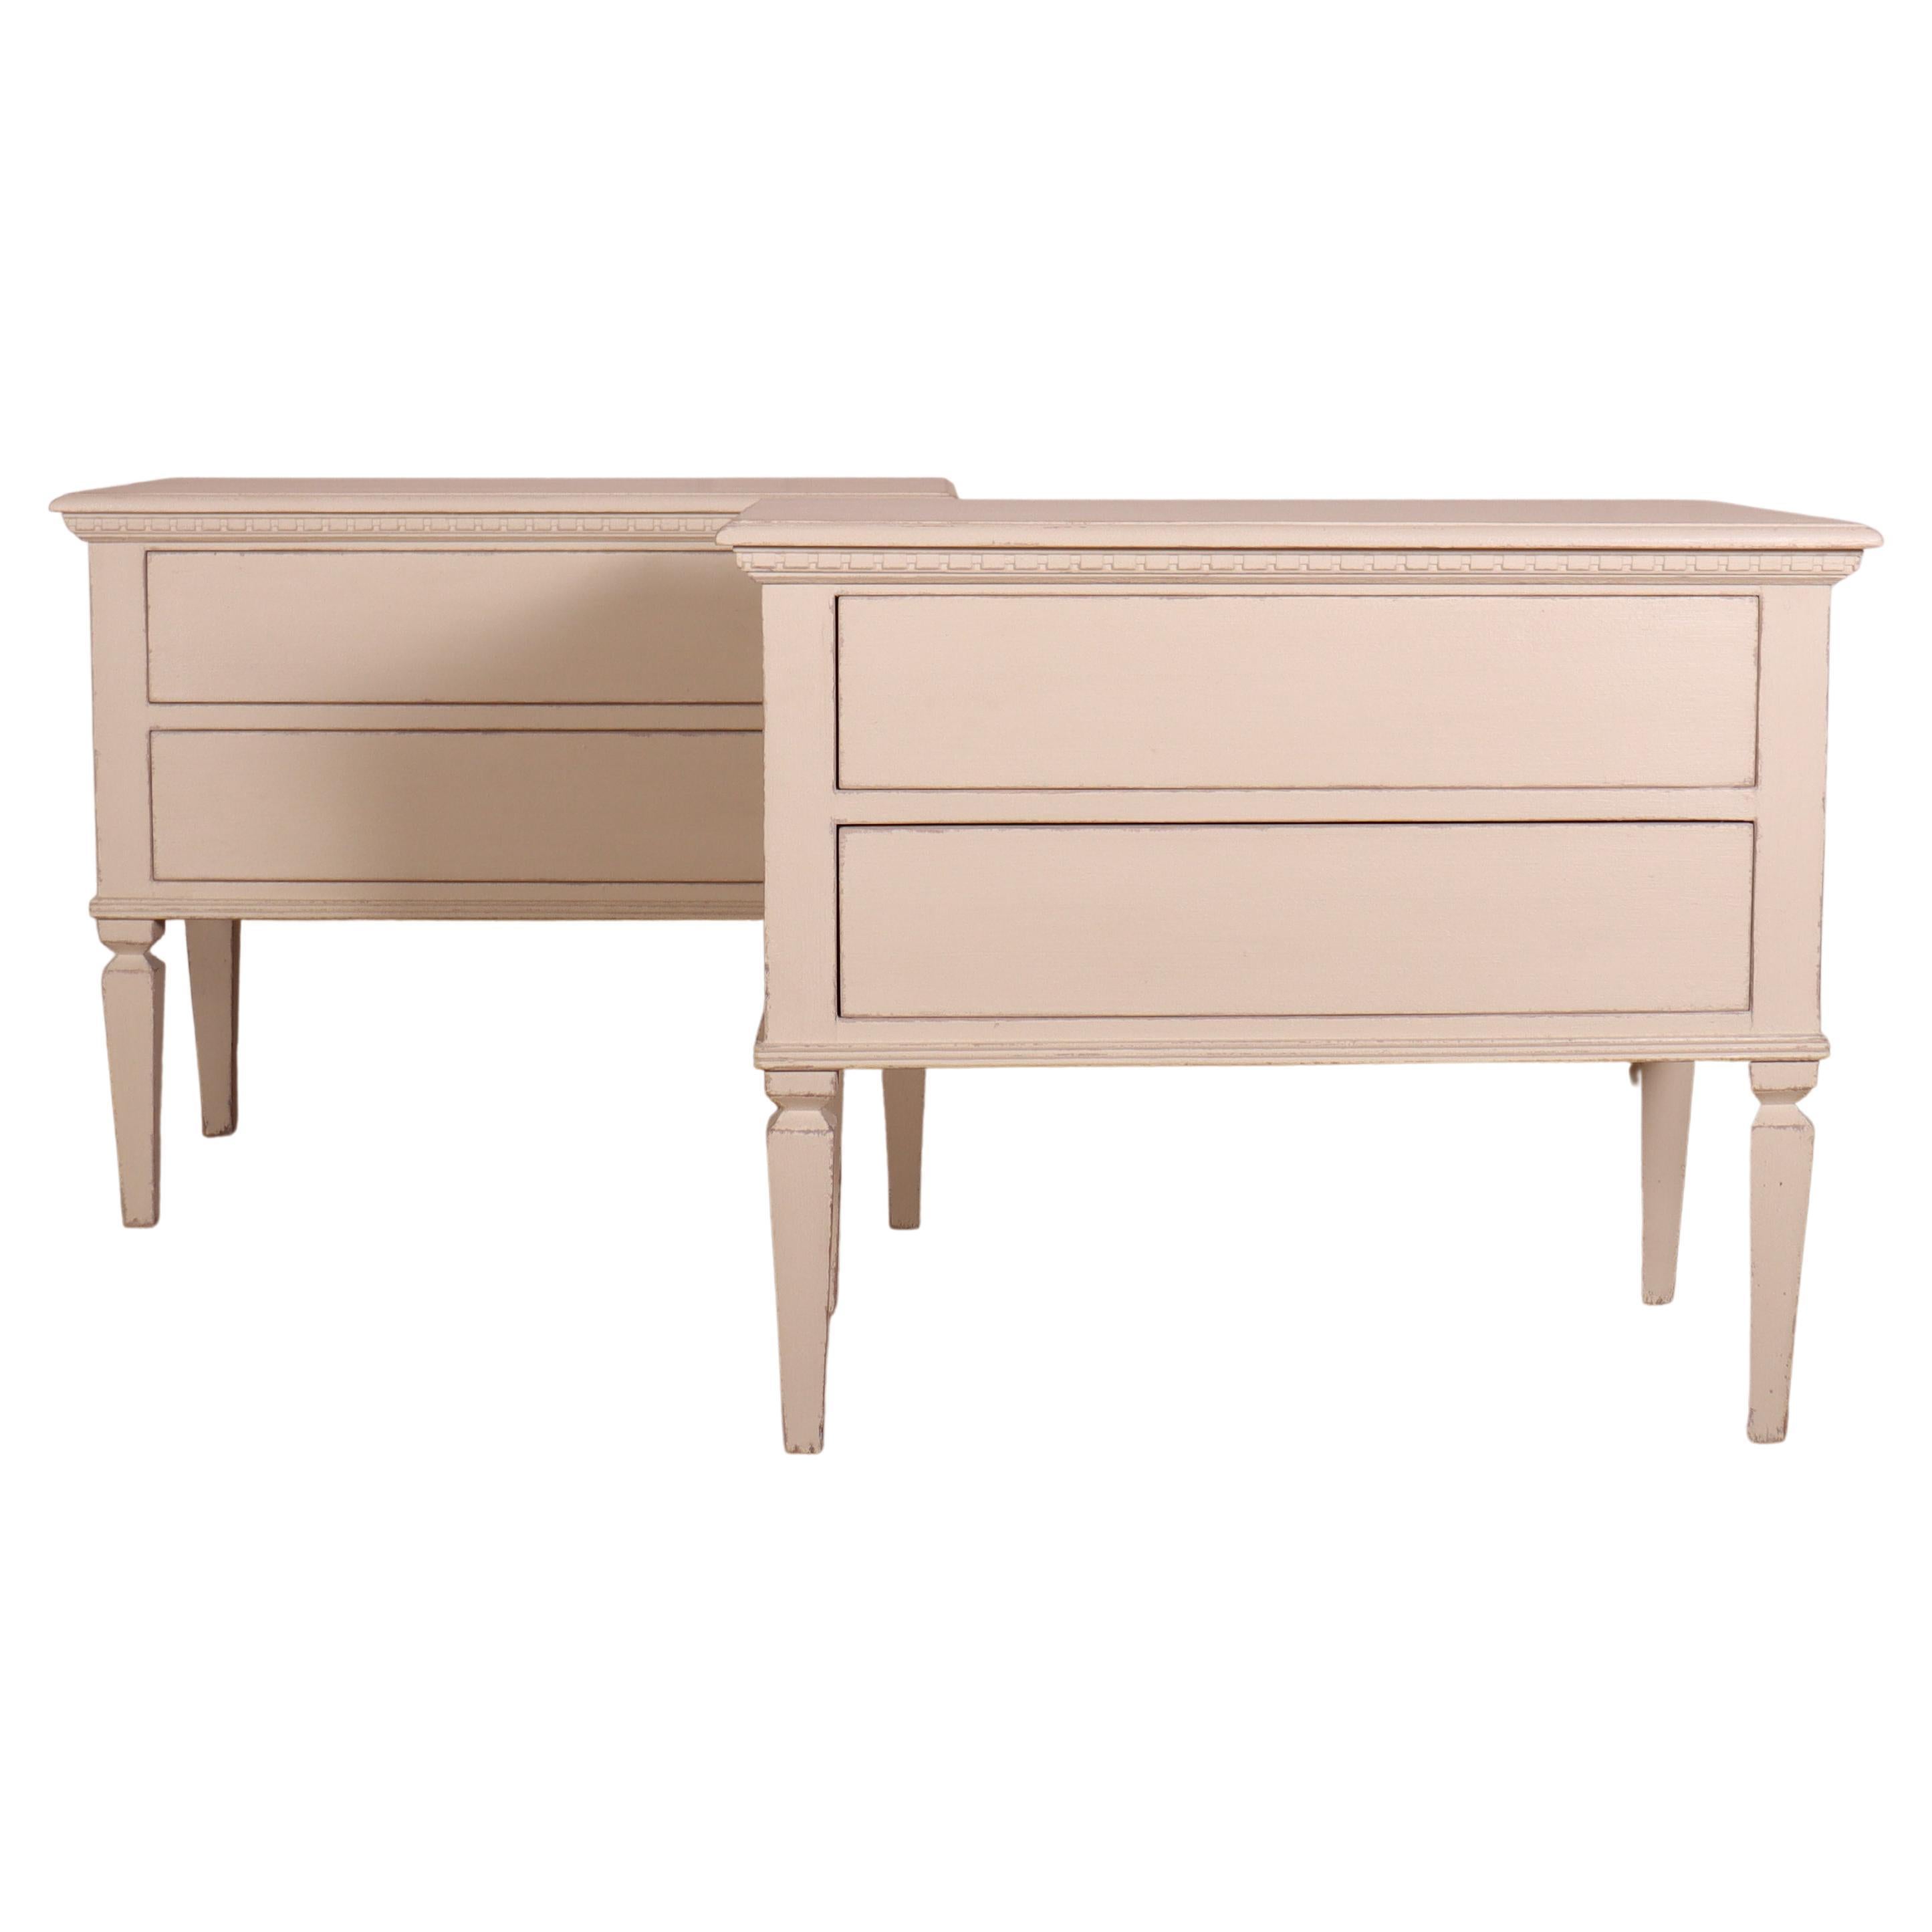 Custom made two drawer commode, awaiting hardware. Can be made to your chosen colour and dimensions.

Can be made as a pair or individually.

Dimensions
35.5 inches (90 cms) Wide
20 inches (51 cms) Deep
29.5 inches (75 cms) High.